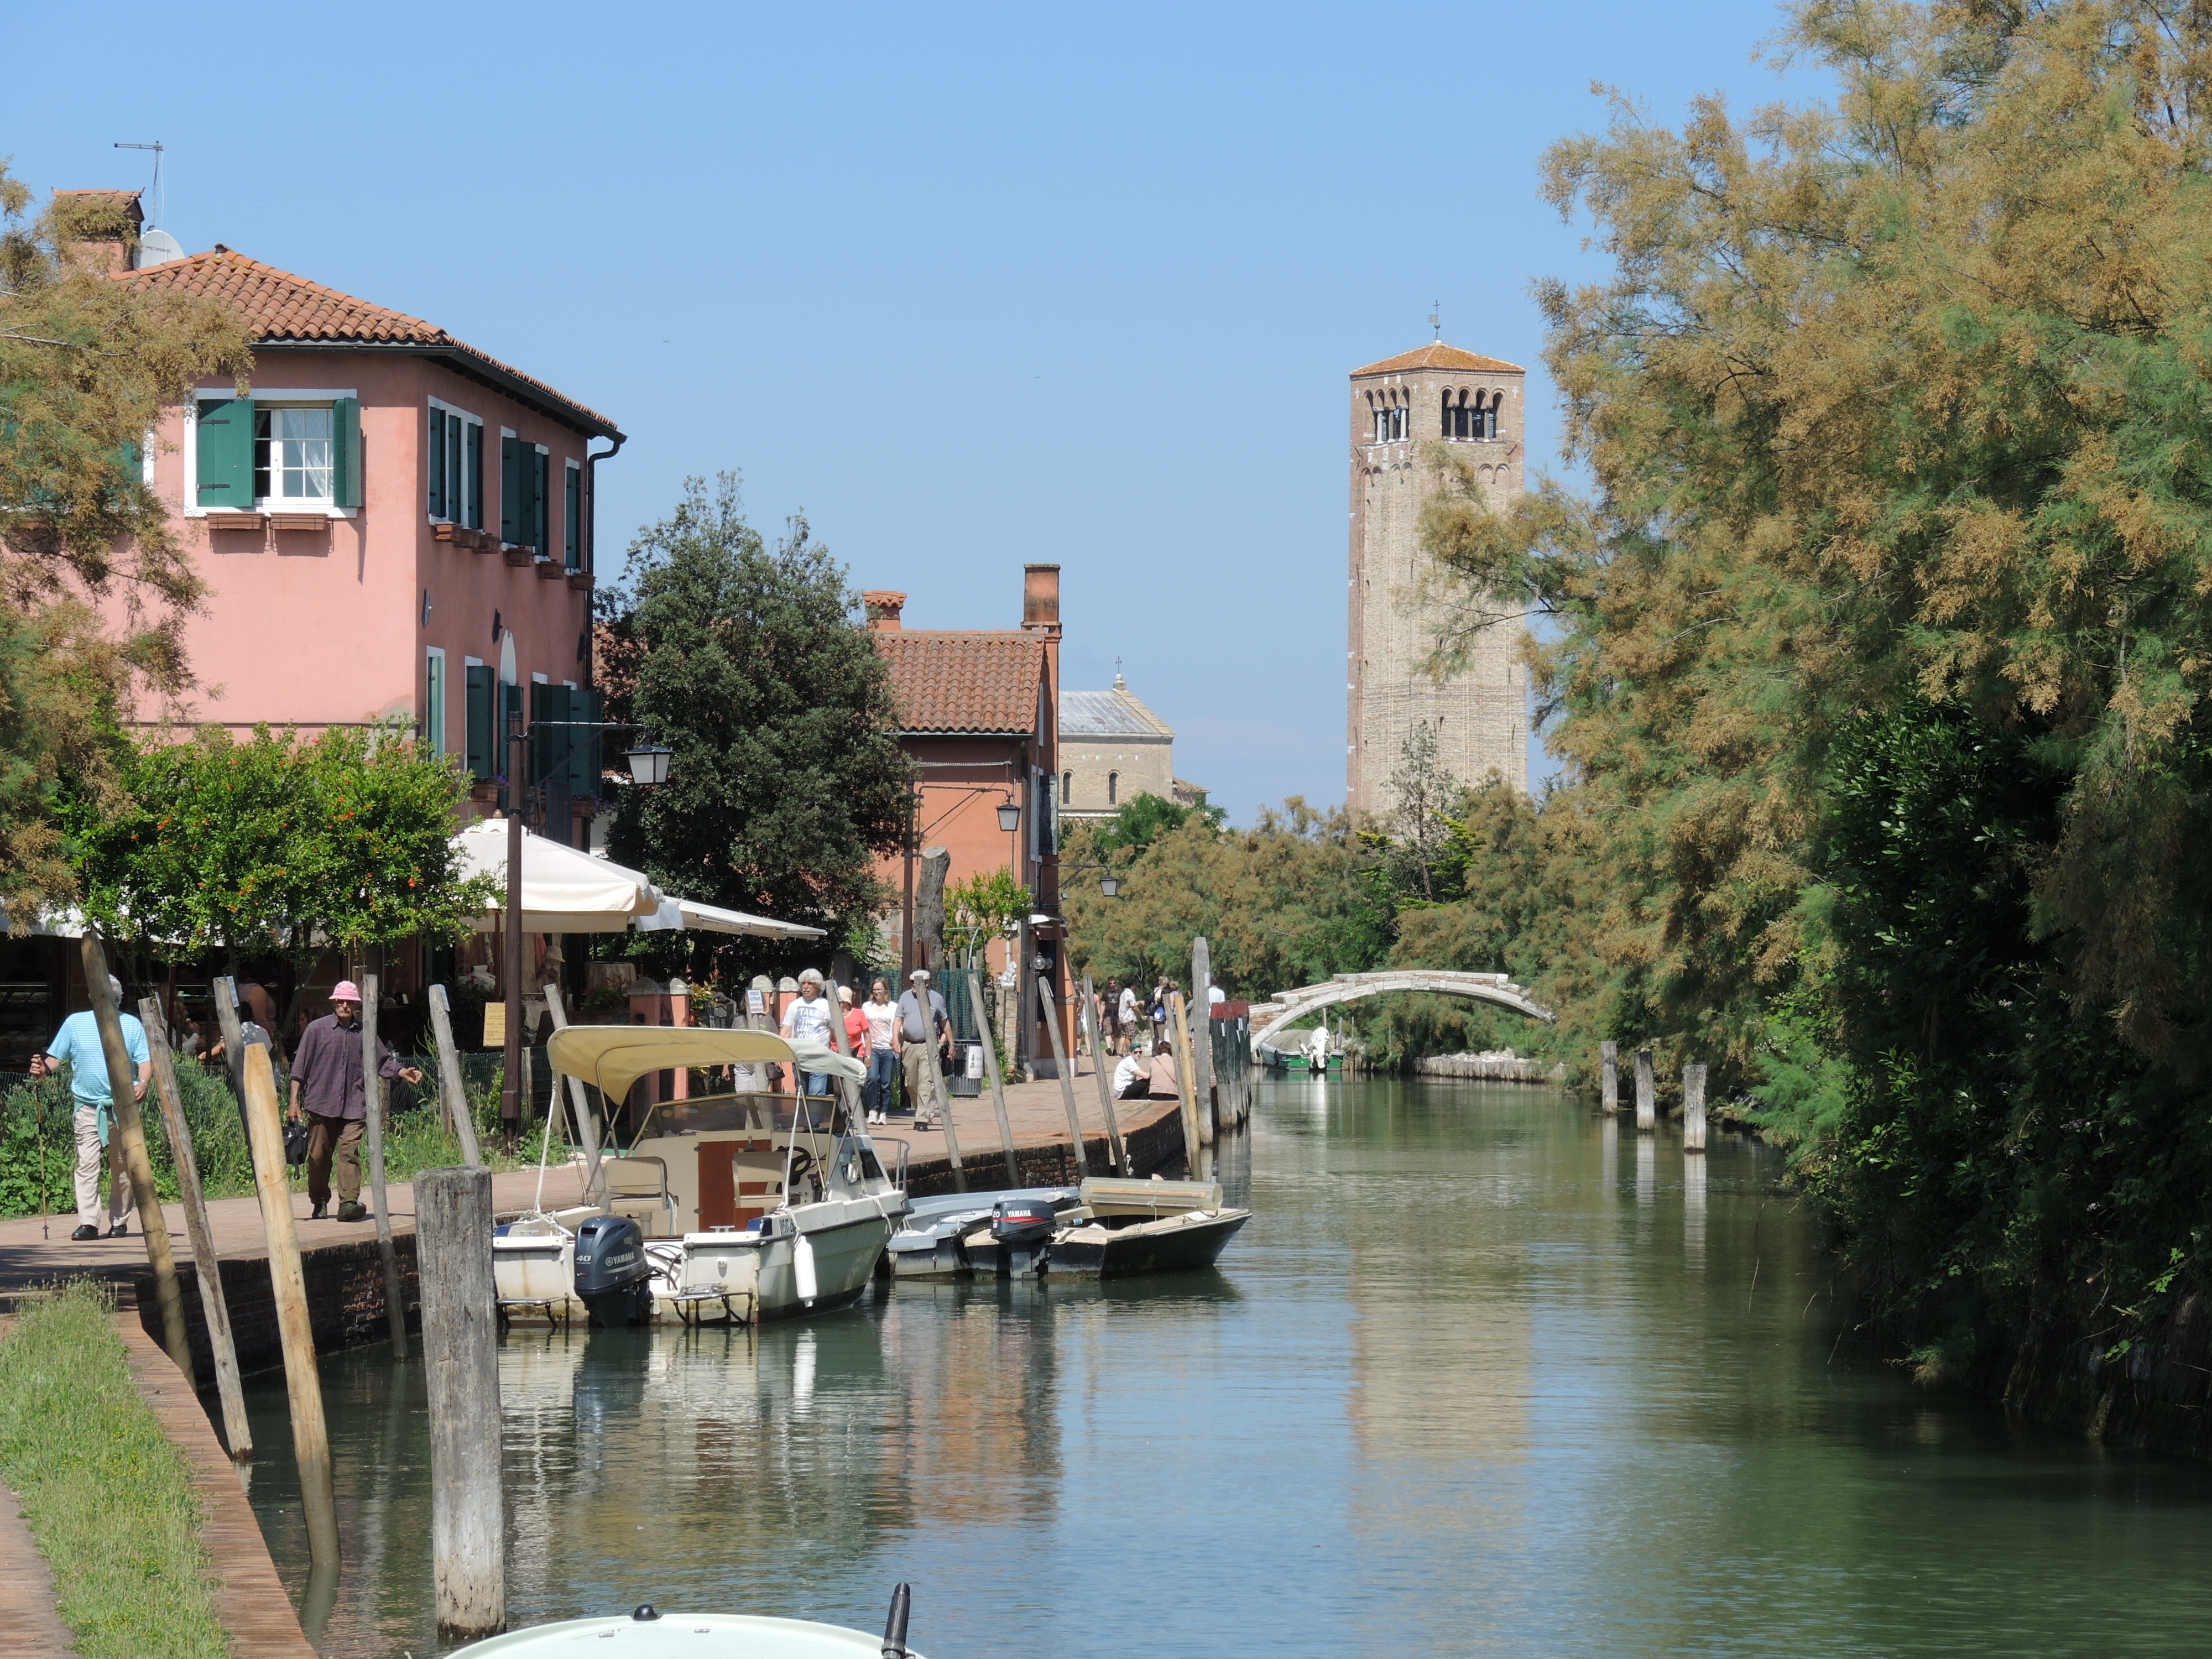 Main canal in Torcello